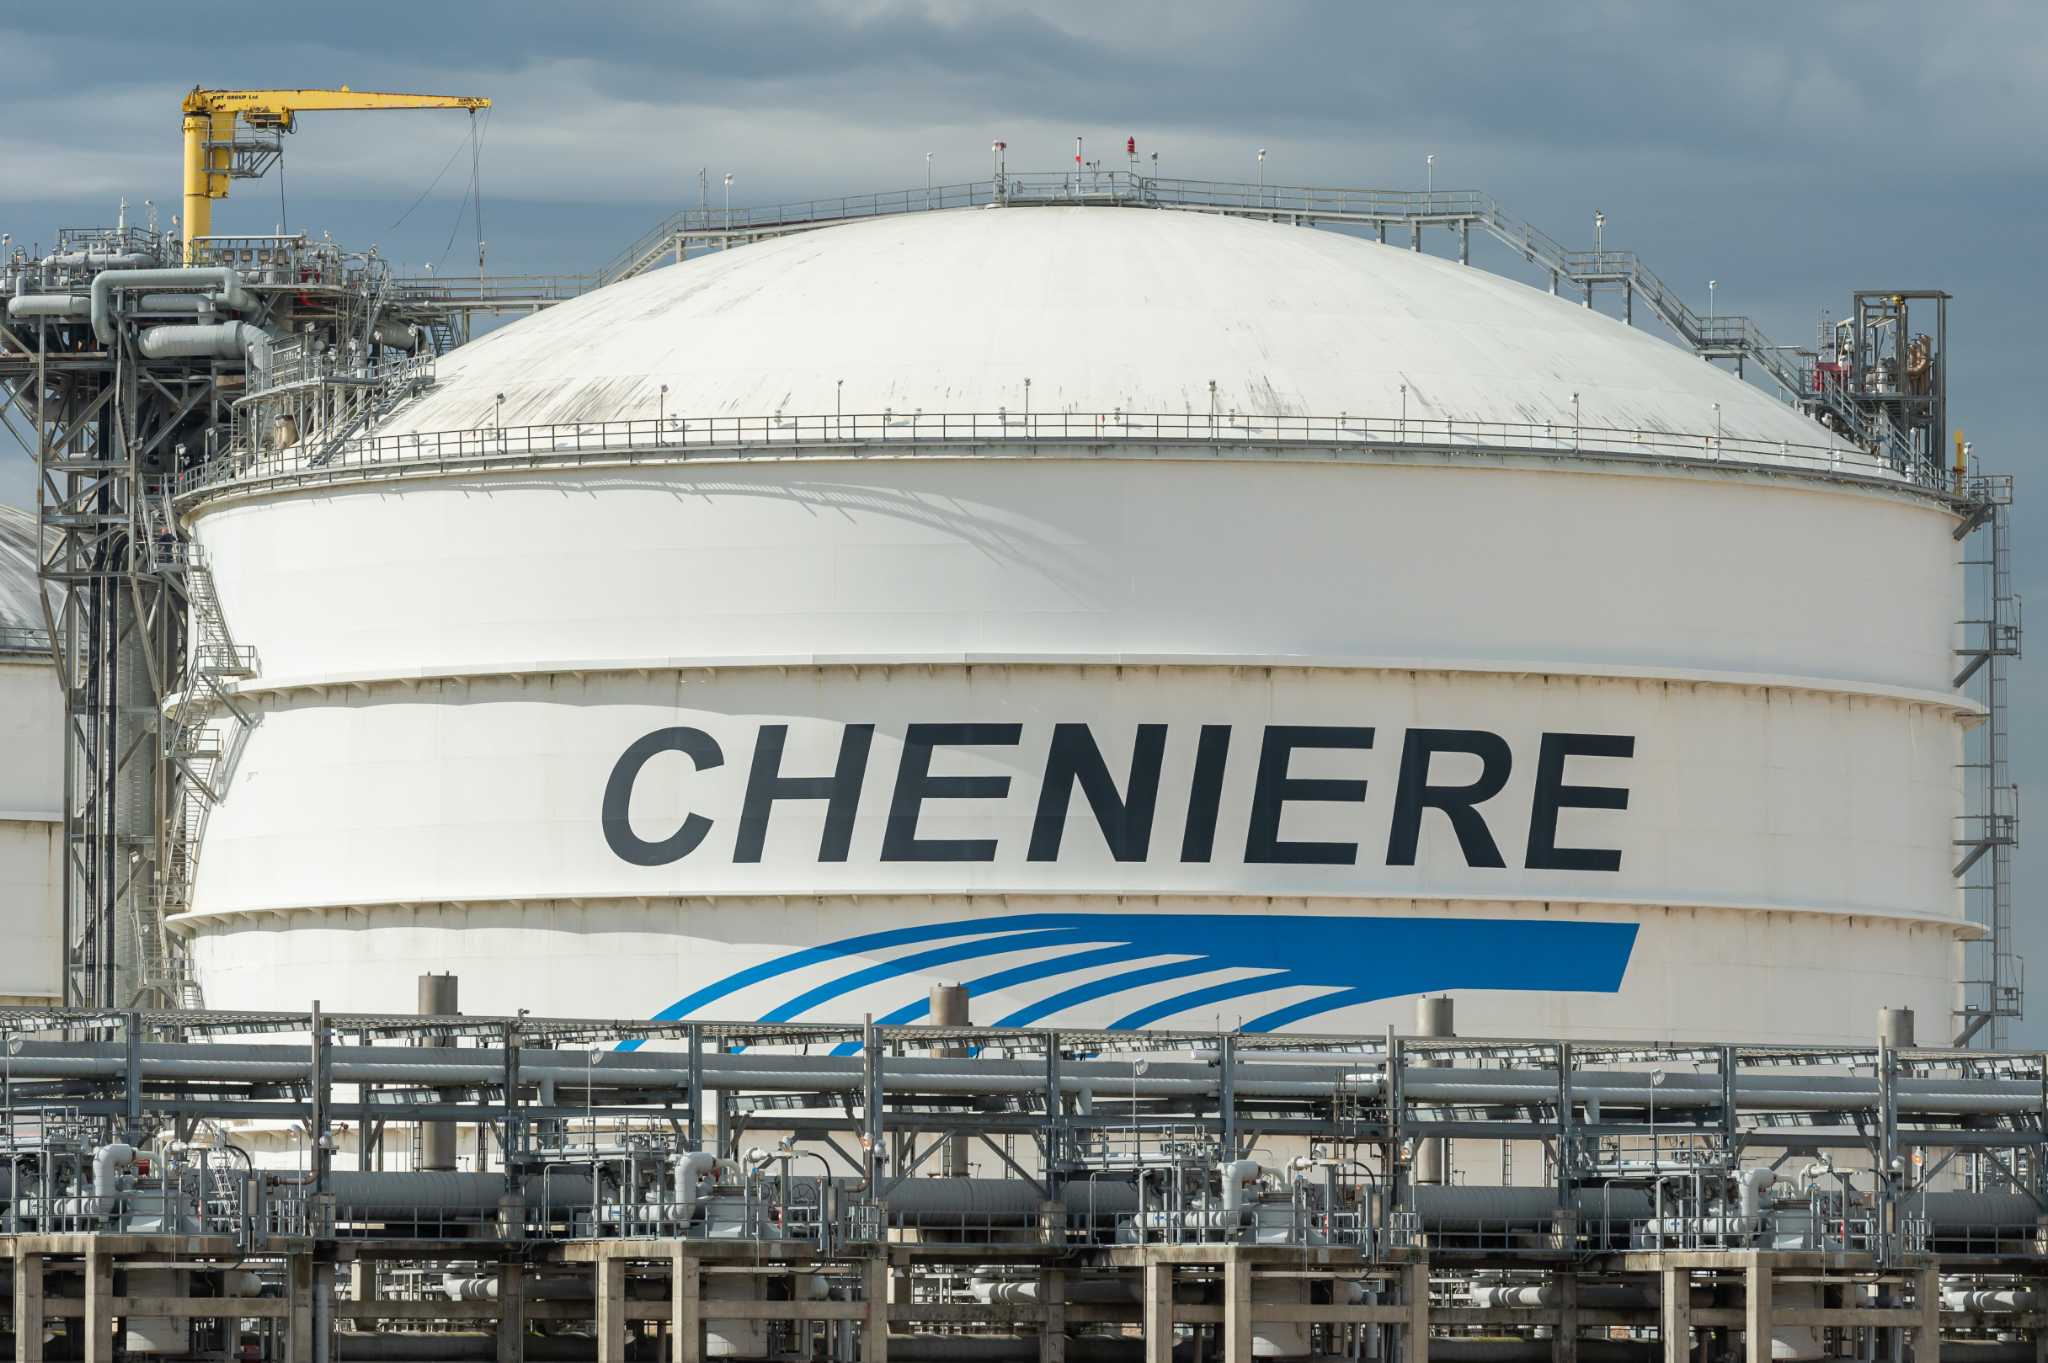 Cheniere commits to building Stage 3 LNG expansion in Corpus Christi